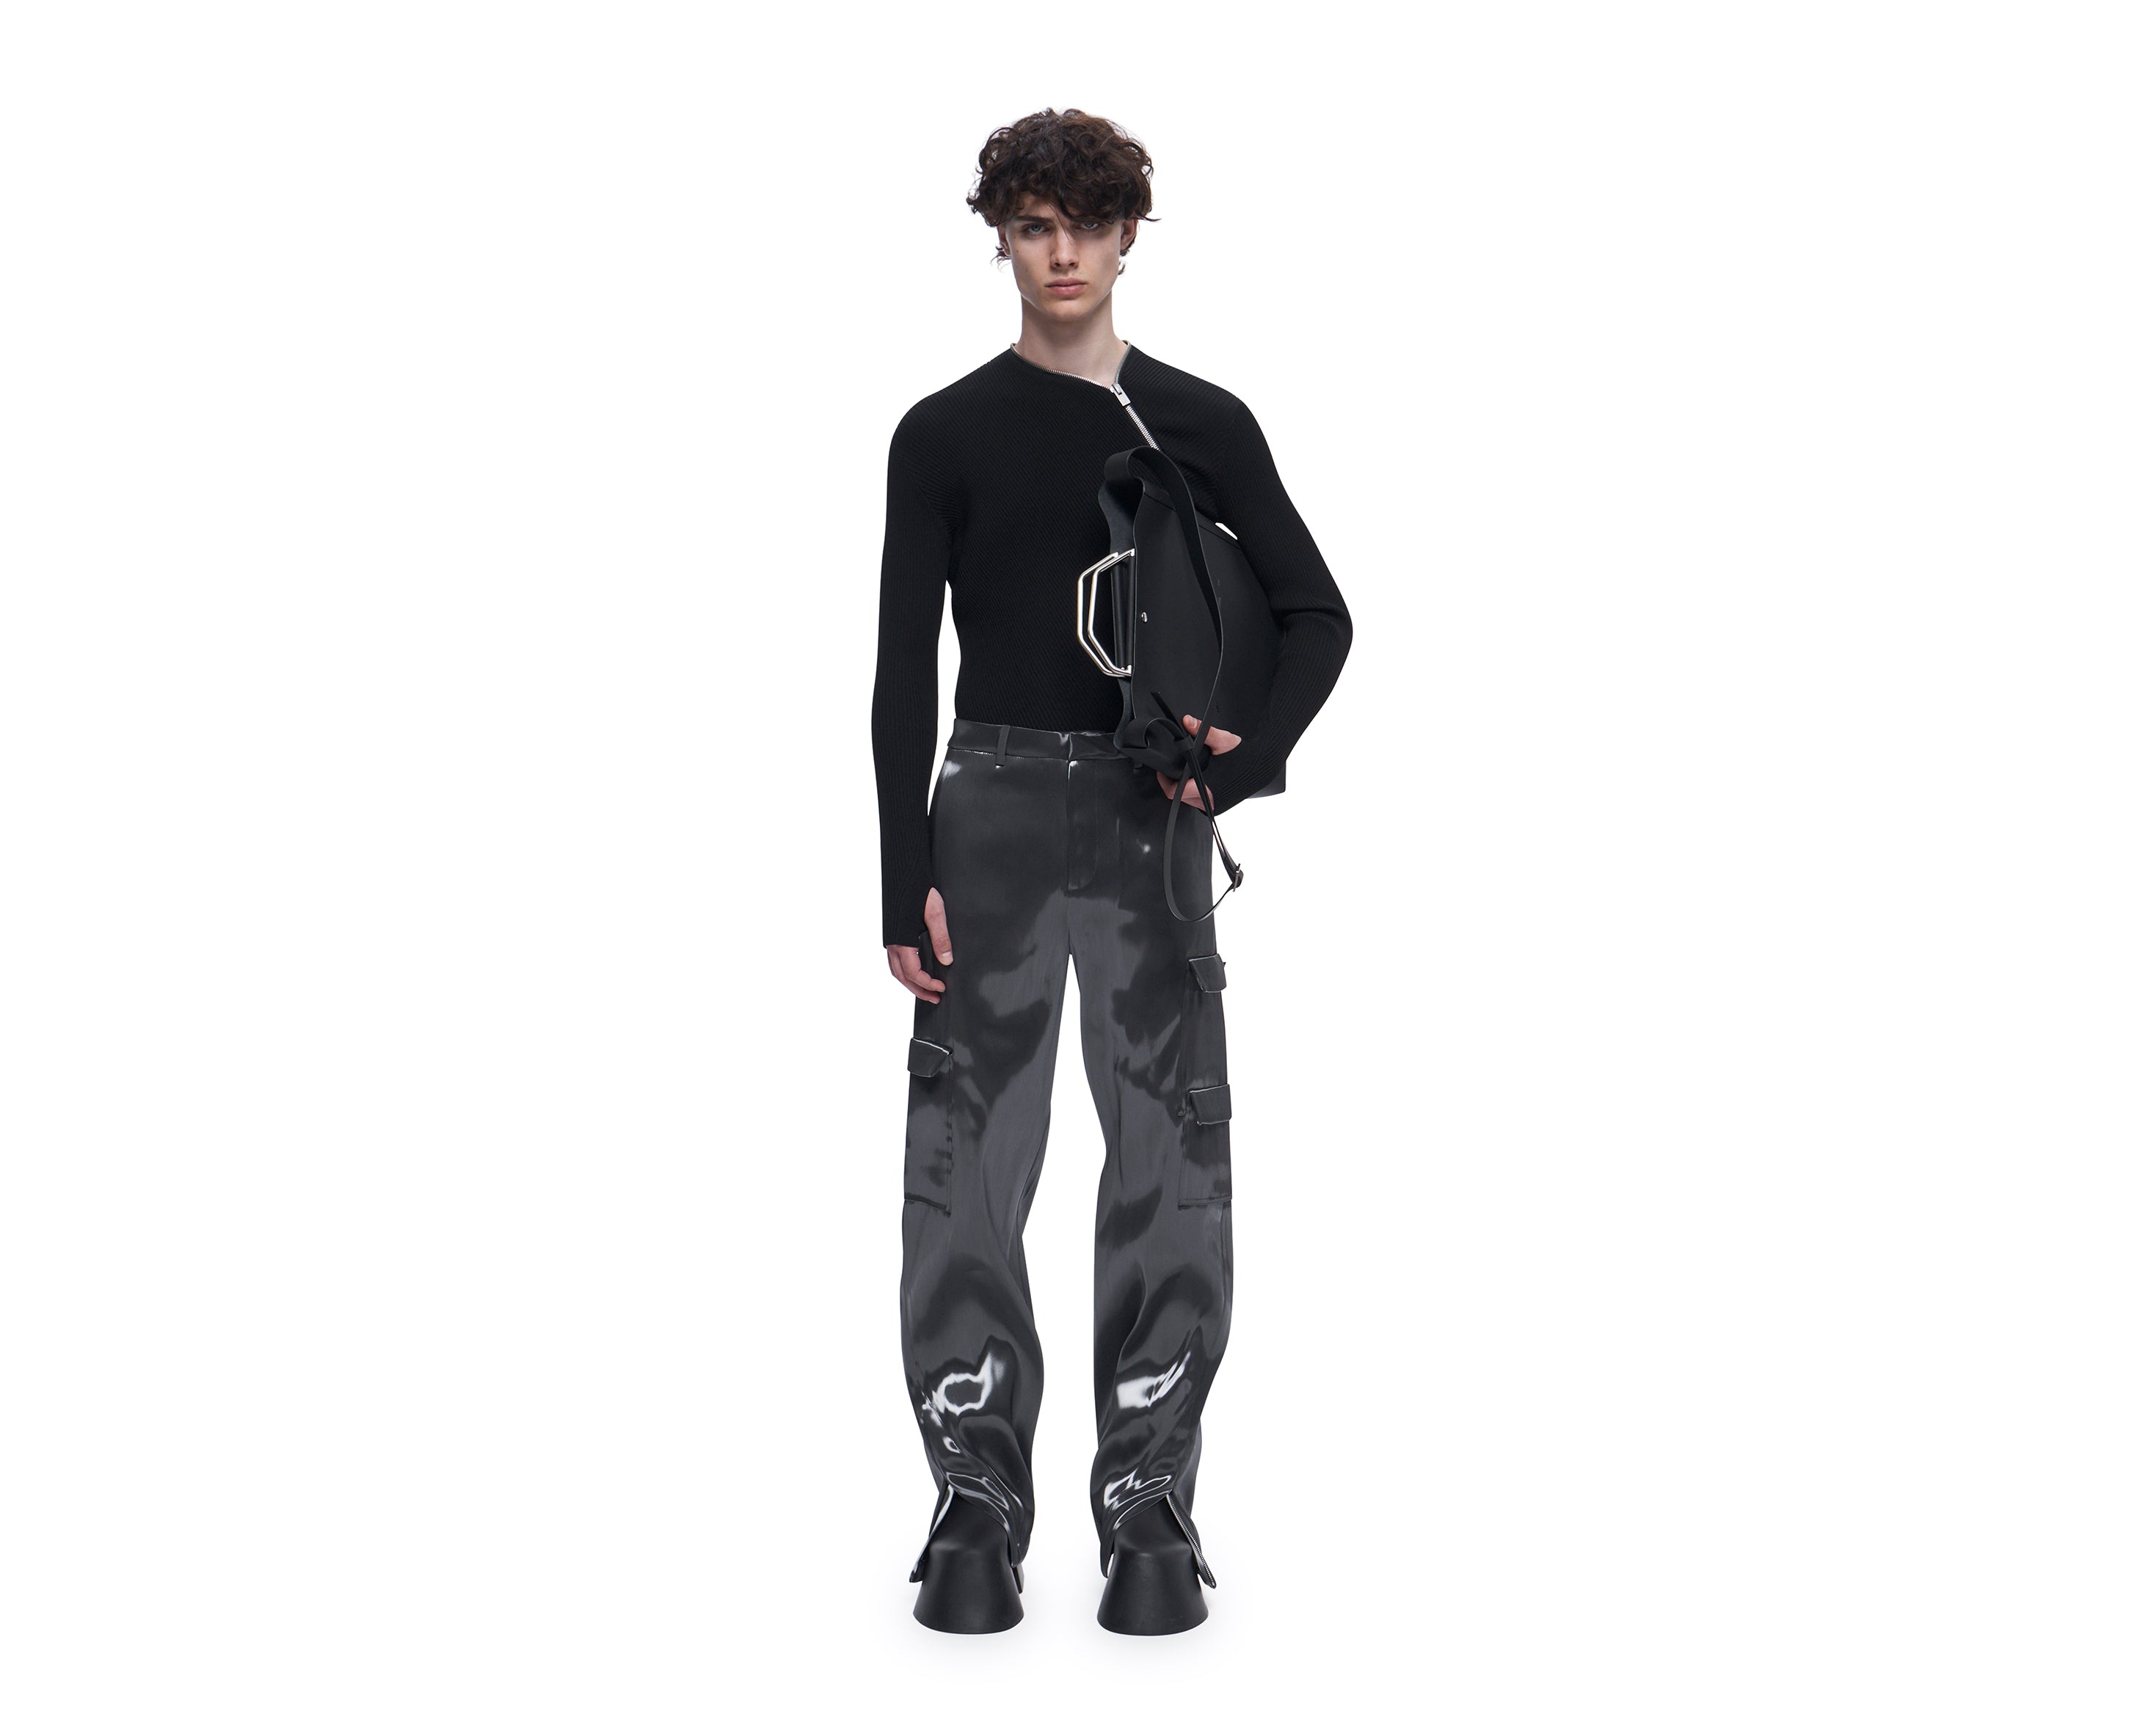 Winter Mens Loose Cargo Pant, Fashion Elstaic Wasit Adjustable Straps  Tapered Trousers with Multi Pockets - Walmart.com